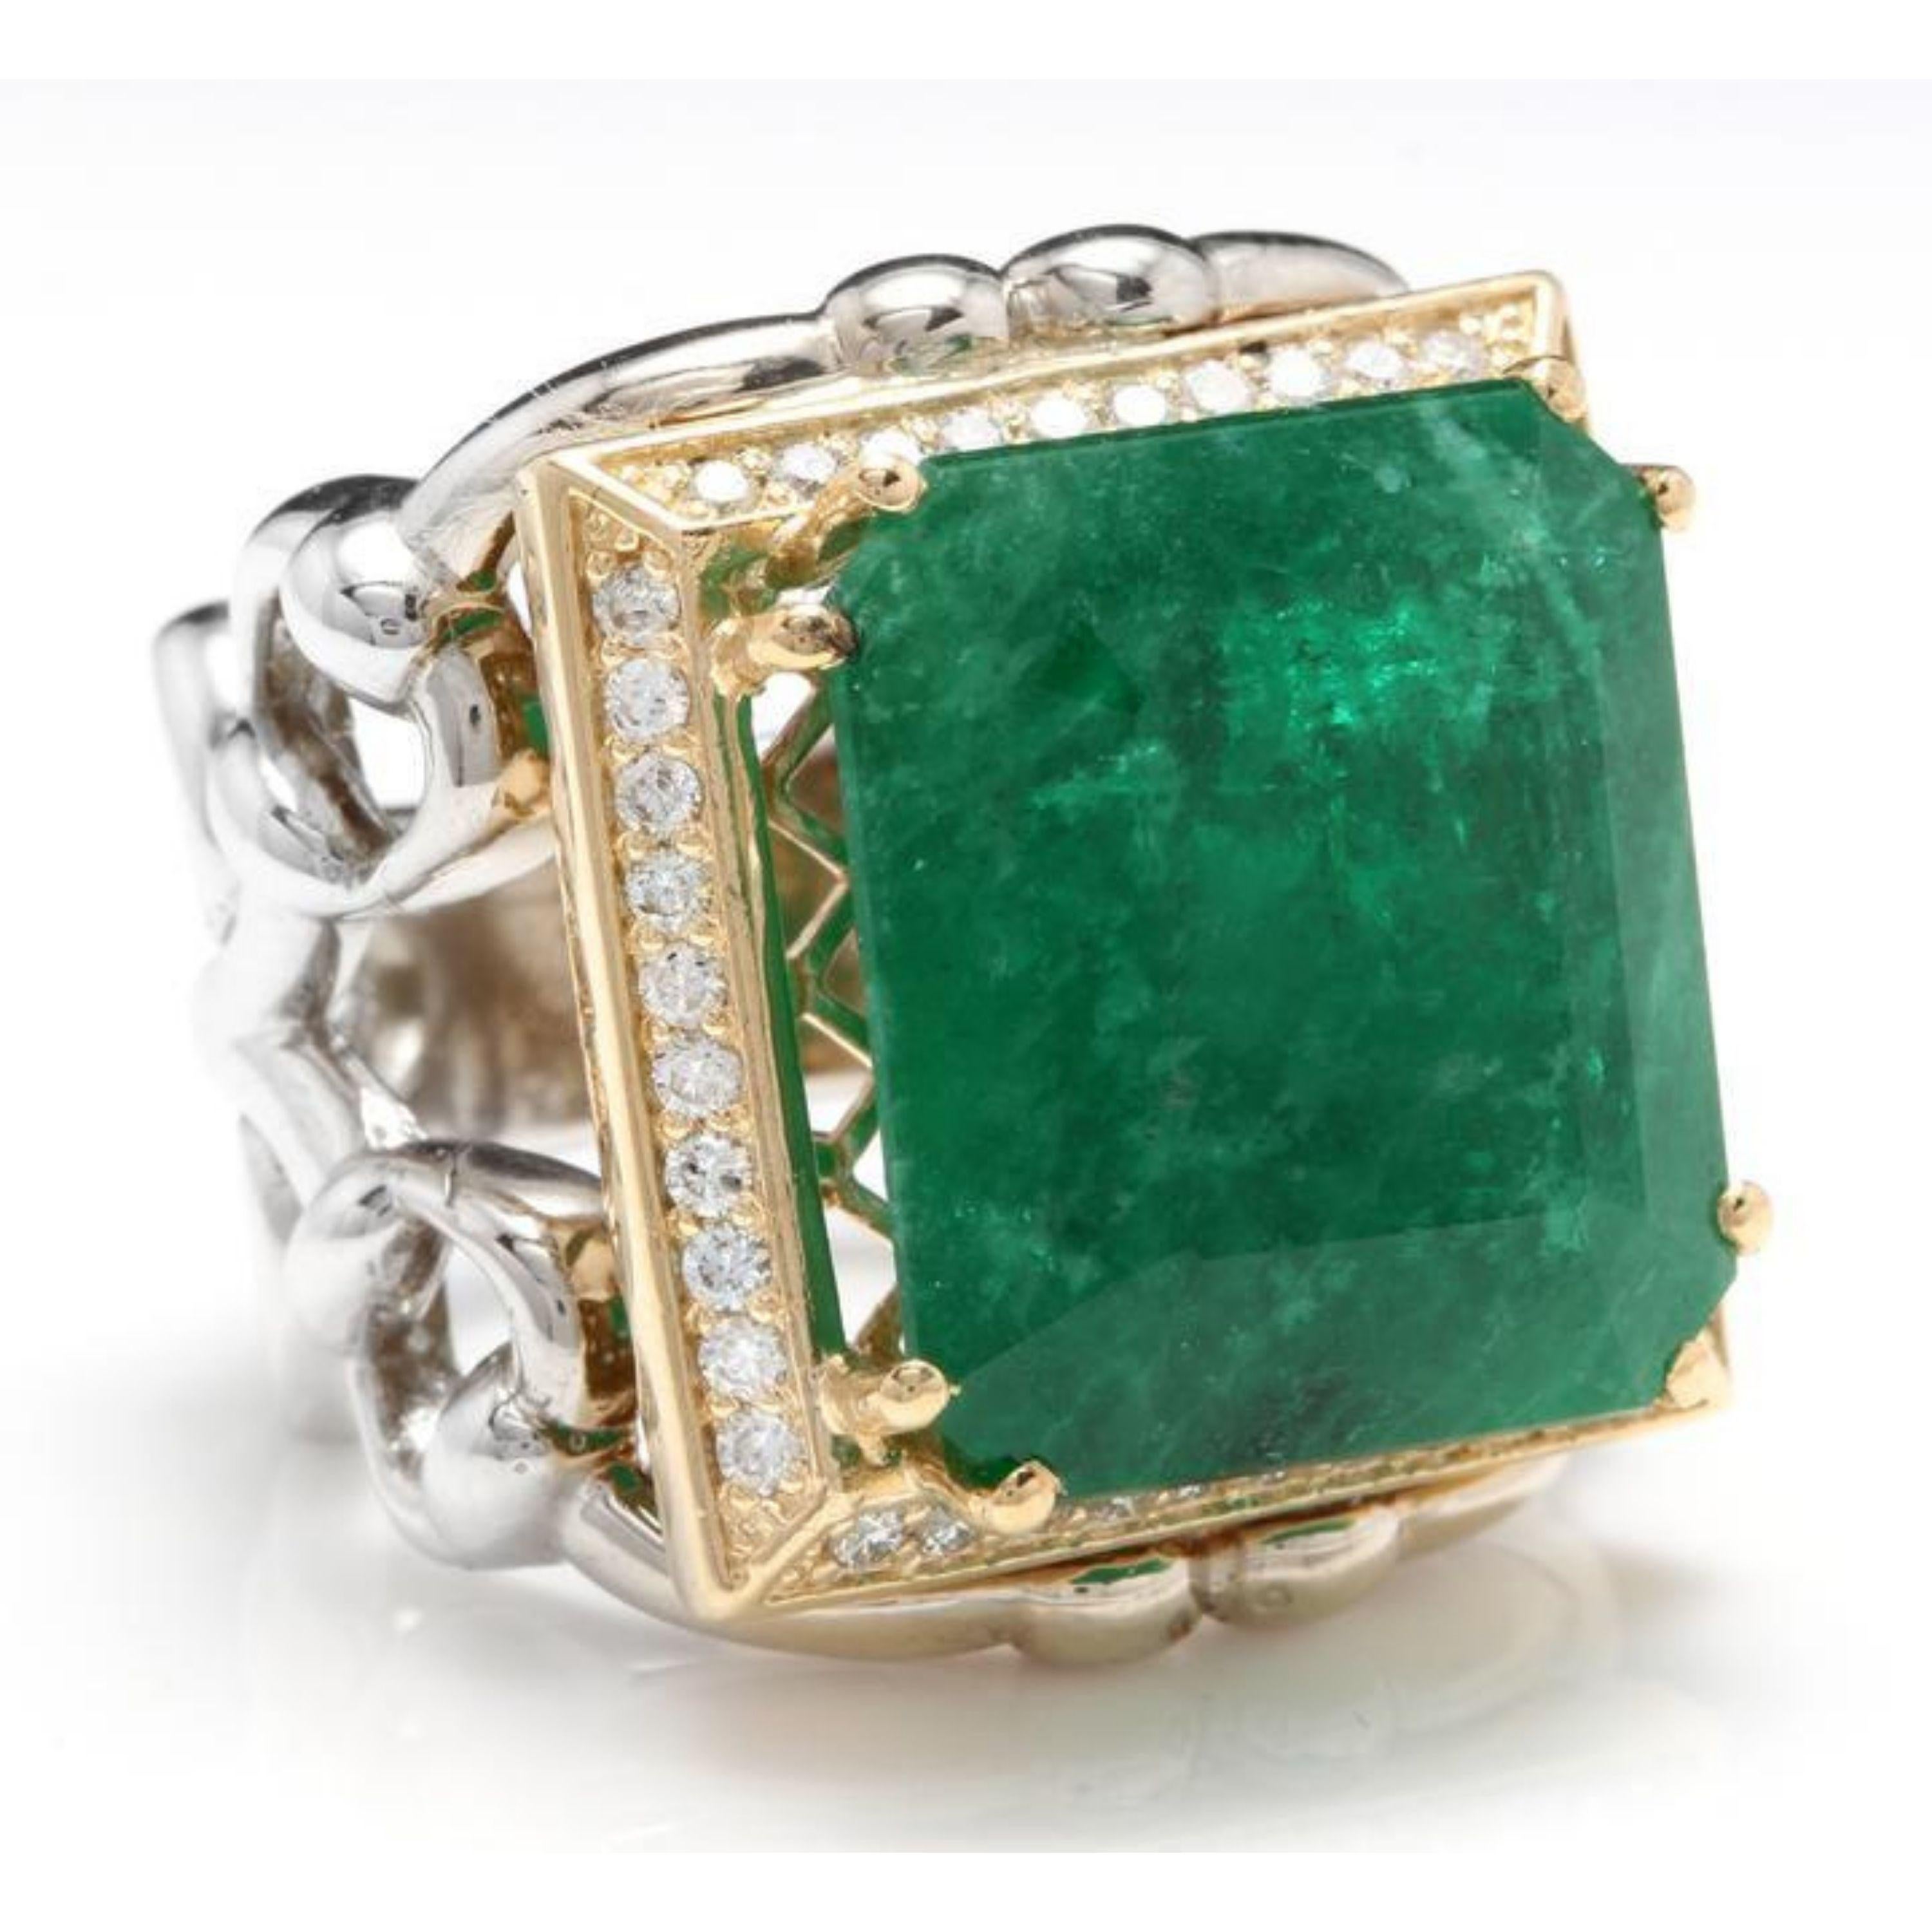 18.35 Carats Natural Emerald and Diamond 14K Solid Two Gold Ring

Total Natural Green Emerald Weight is: 17.60 Carats

Emerald Measures: 17.00 x 15.50mm

Natural Round Diamonds Weight: Approx. 0.75 Carats (color G-H / Clarity SI1-SI2)

Ring size: 7